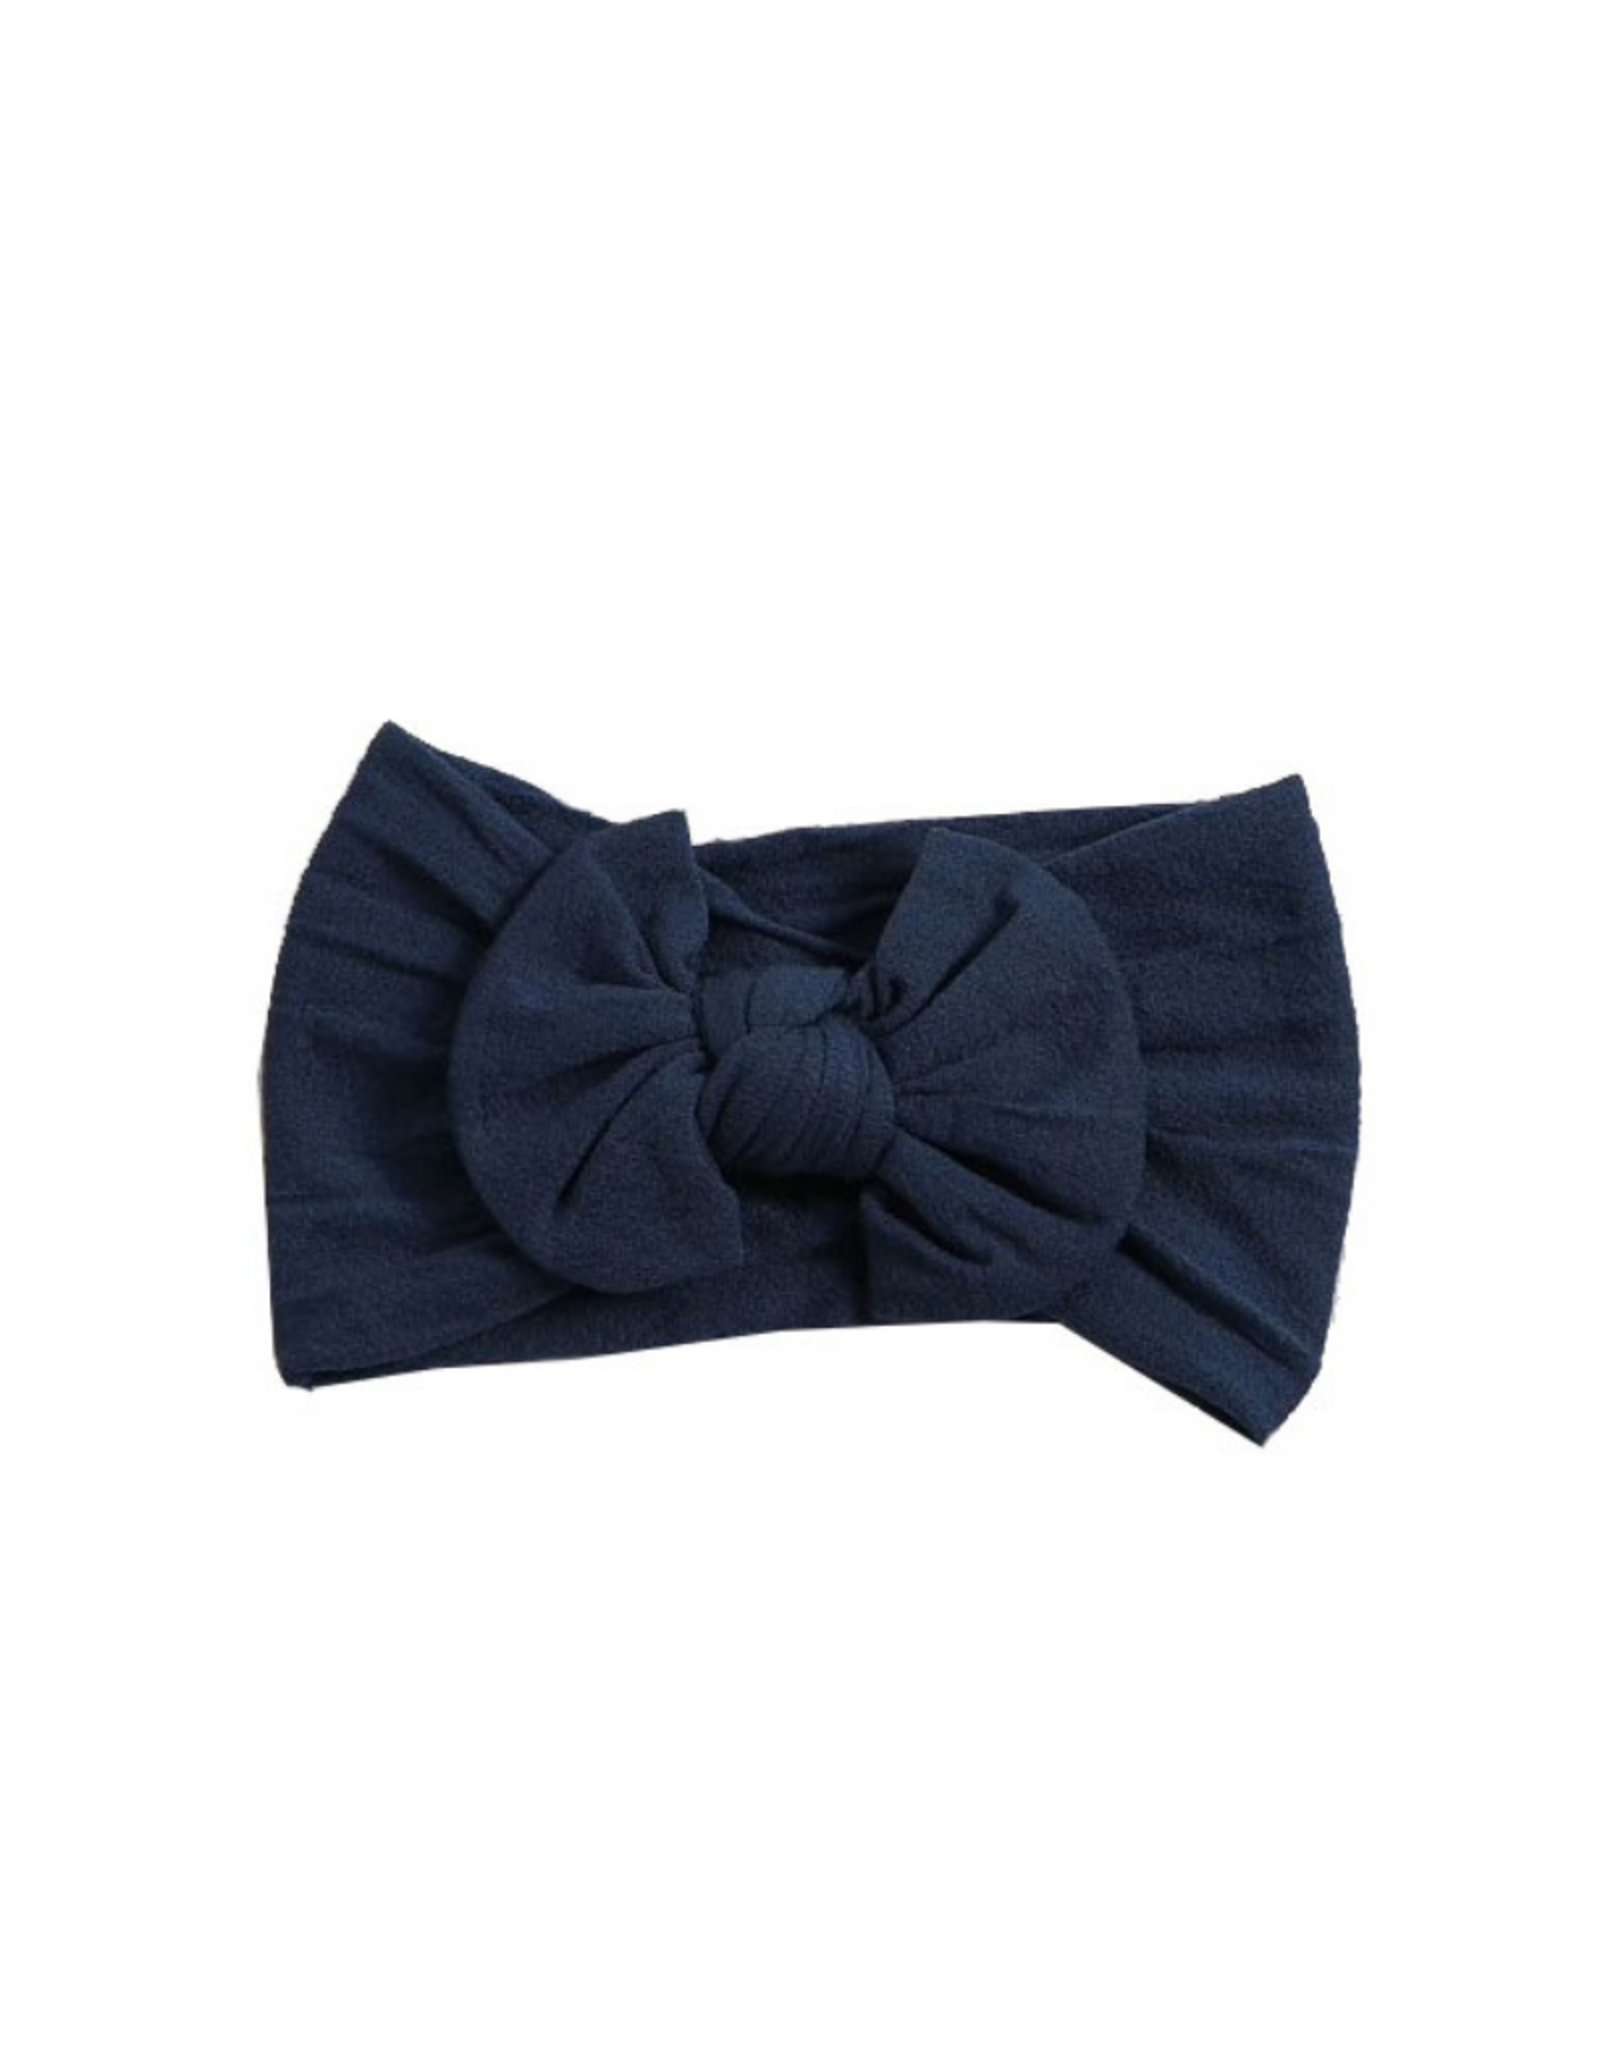 Emerson and Friends Knot Headband A-501 Navy